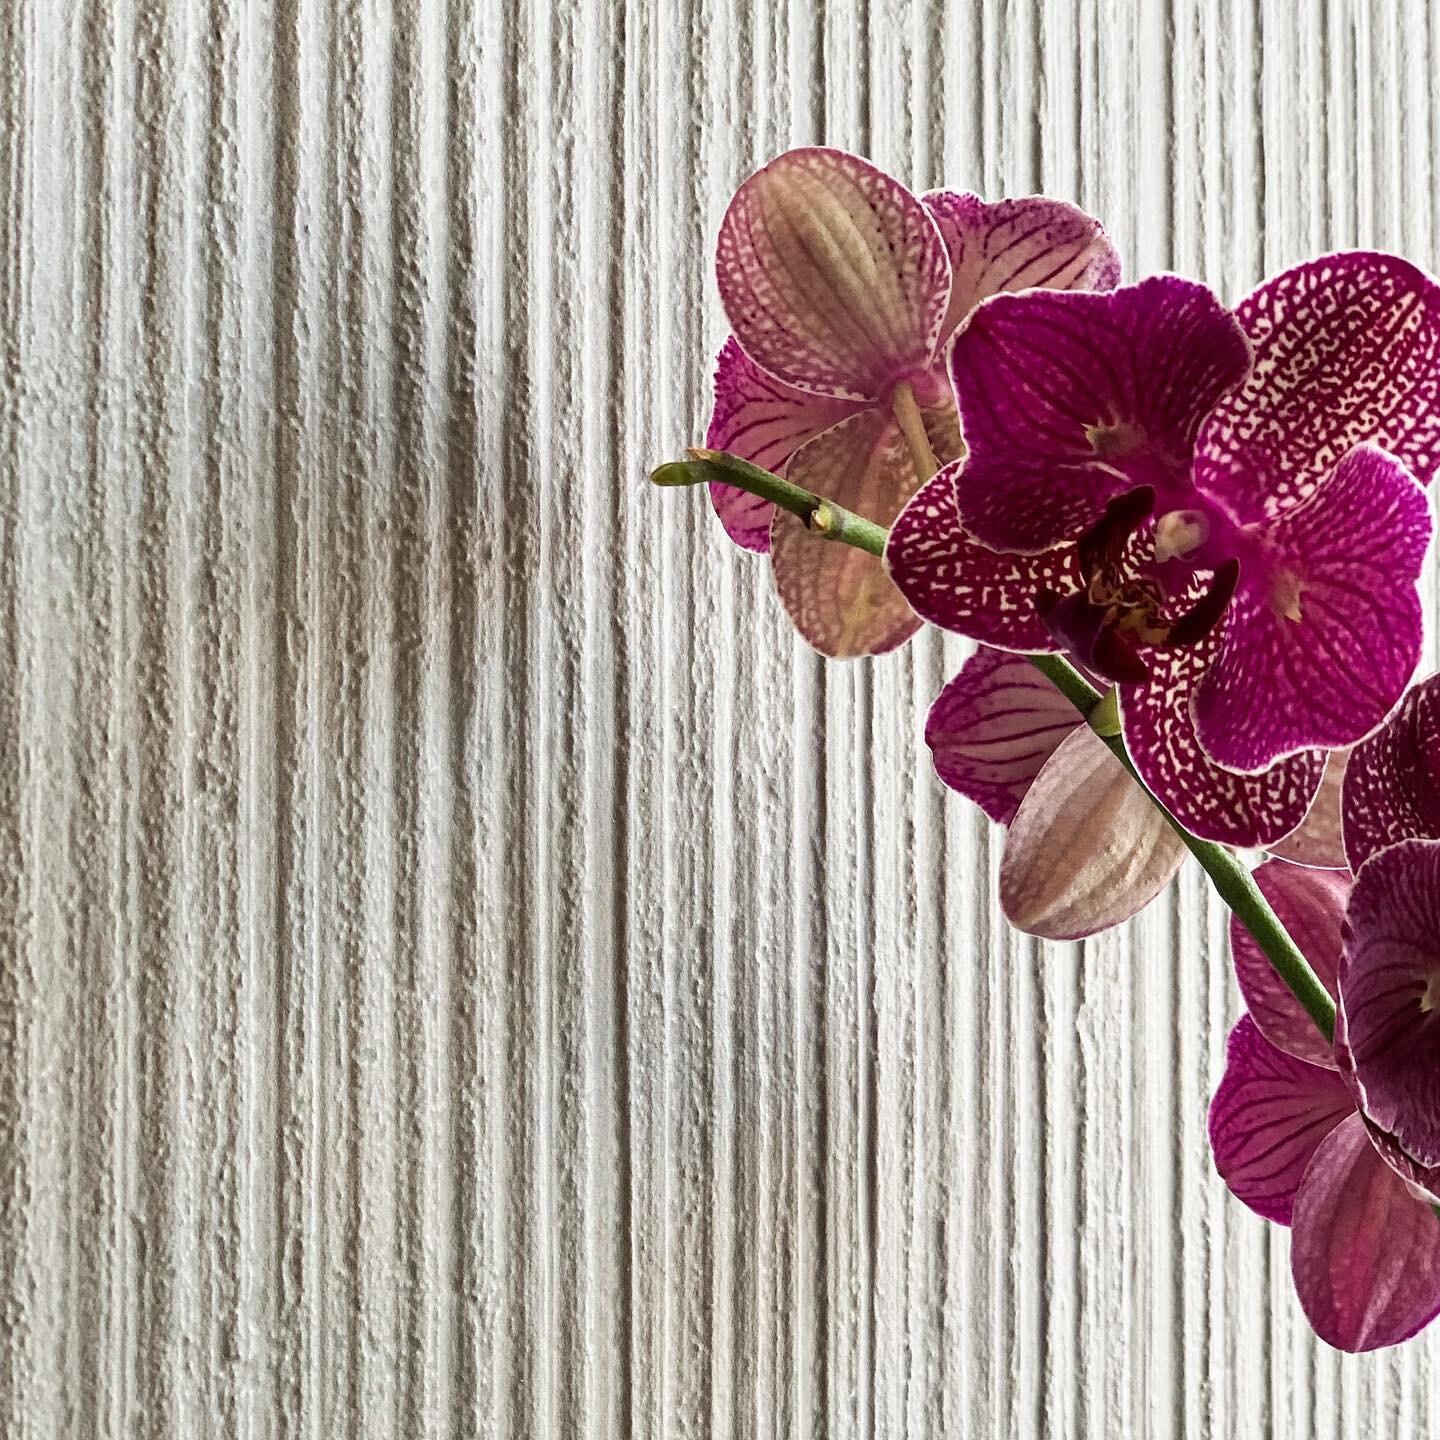 Summer vibes with Materika Spatula 3D Antracite @jrbotas @marazziceramiche #ceramics #tile #pattern #orchid #nature #wallcoverings #algarve